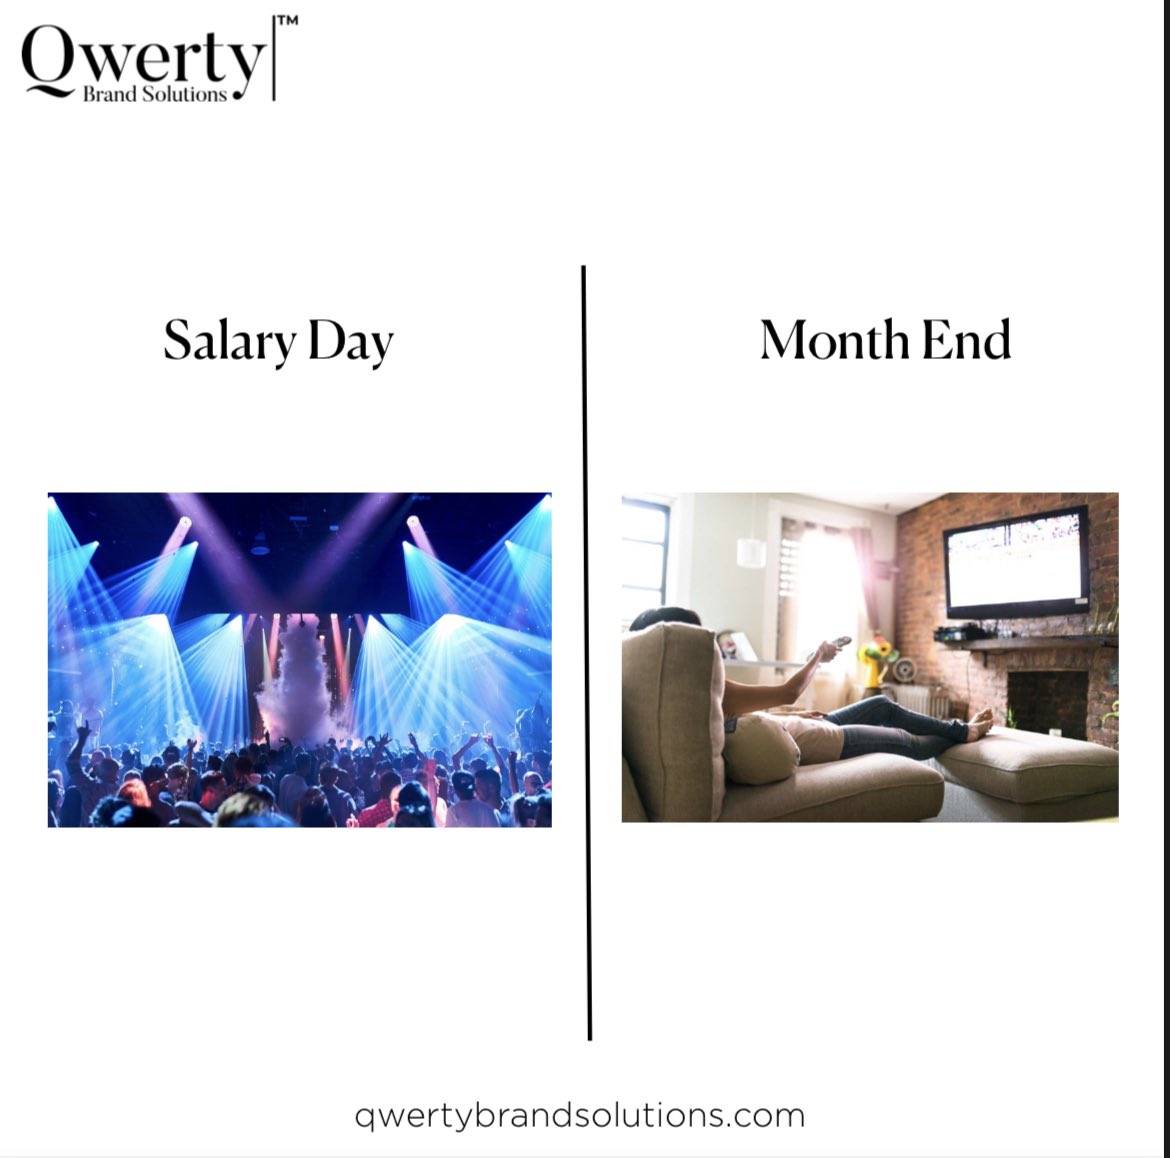 Salary day: A day where our bank balance doesn't give us anxiety. 😂

#qwerty #qwertybrandsolutions #digitalmarketing #digitalmarketingagency #salary #salaryday #payday #corporate #monthend #justforfun #trending